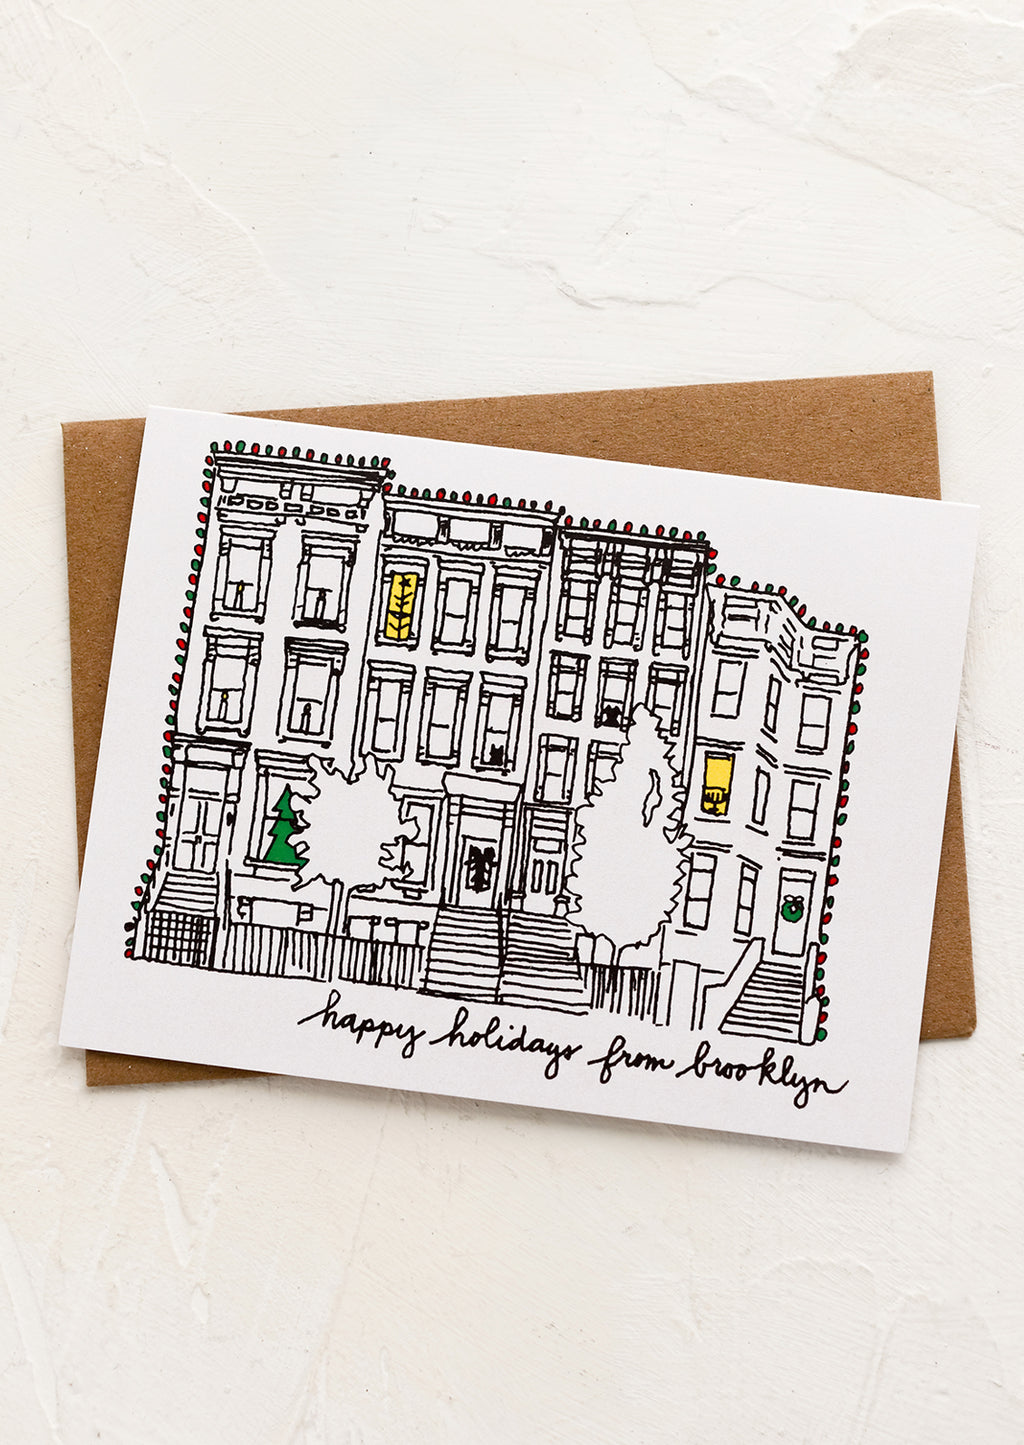 2: A card with drawing of brownstone and text reading "Happy holidays from Brooklyn".